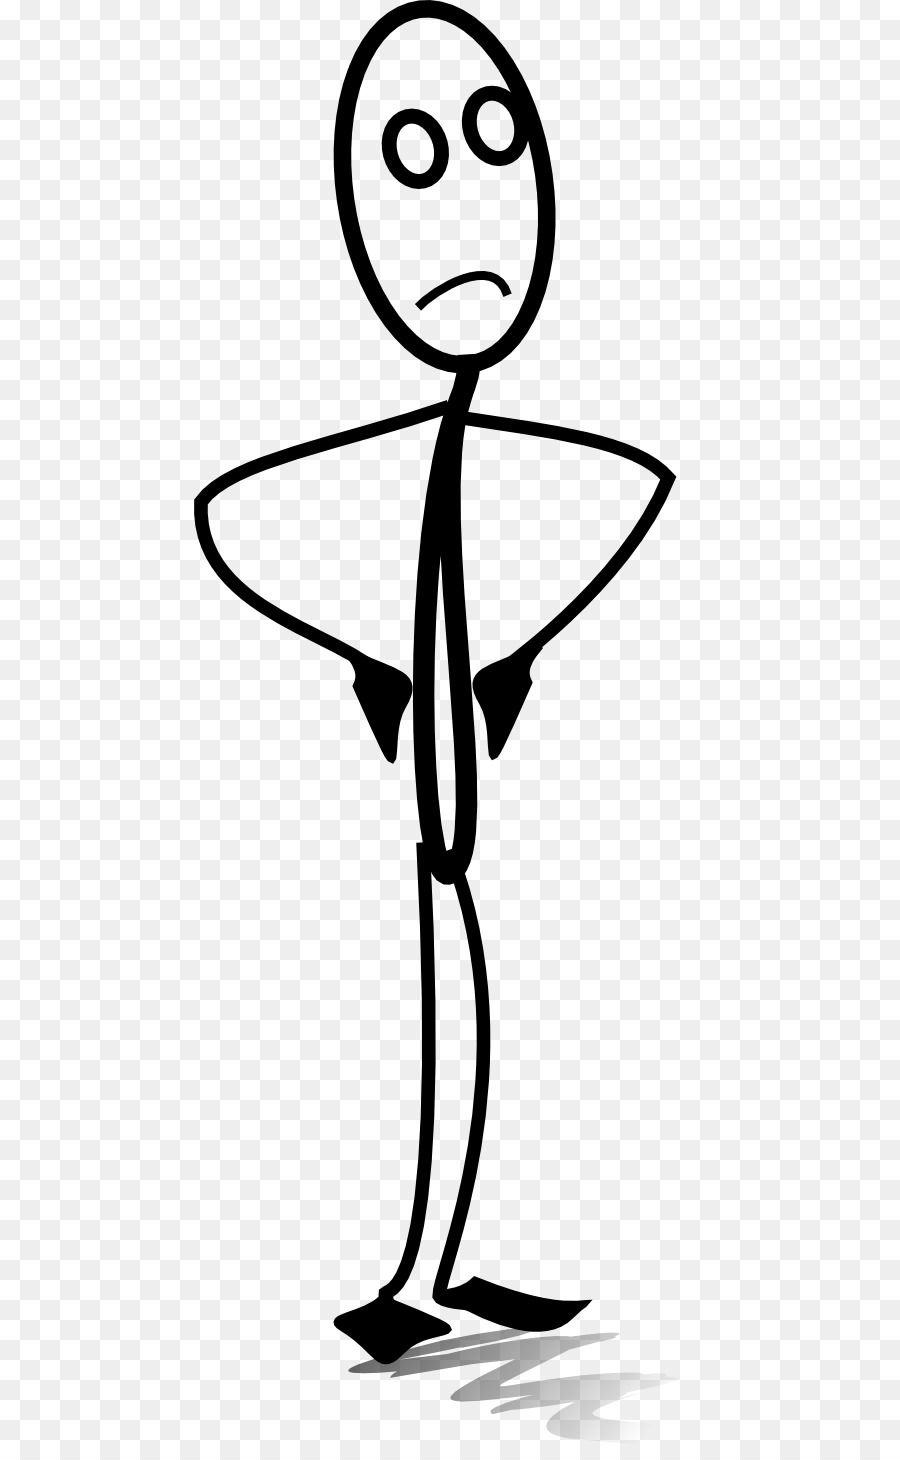 Stick figure Anger Clip art - Angry Pics png download - 512*1447 - Free Transparent Stick Figure png Download.